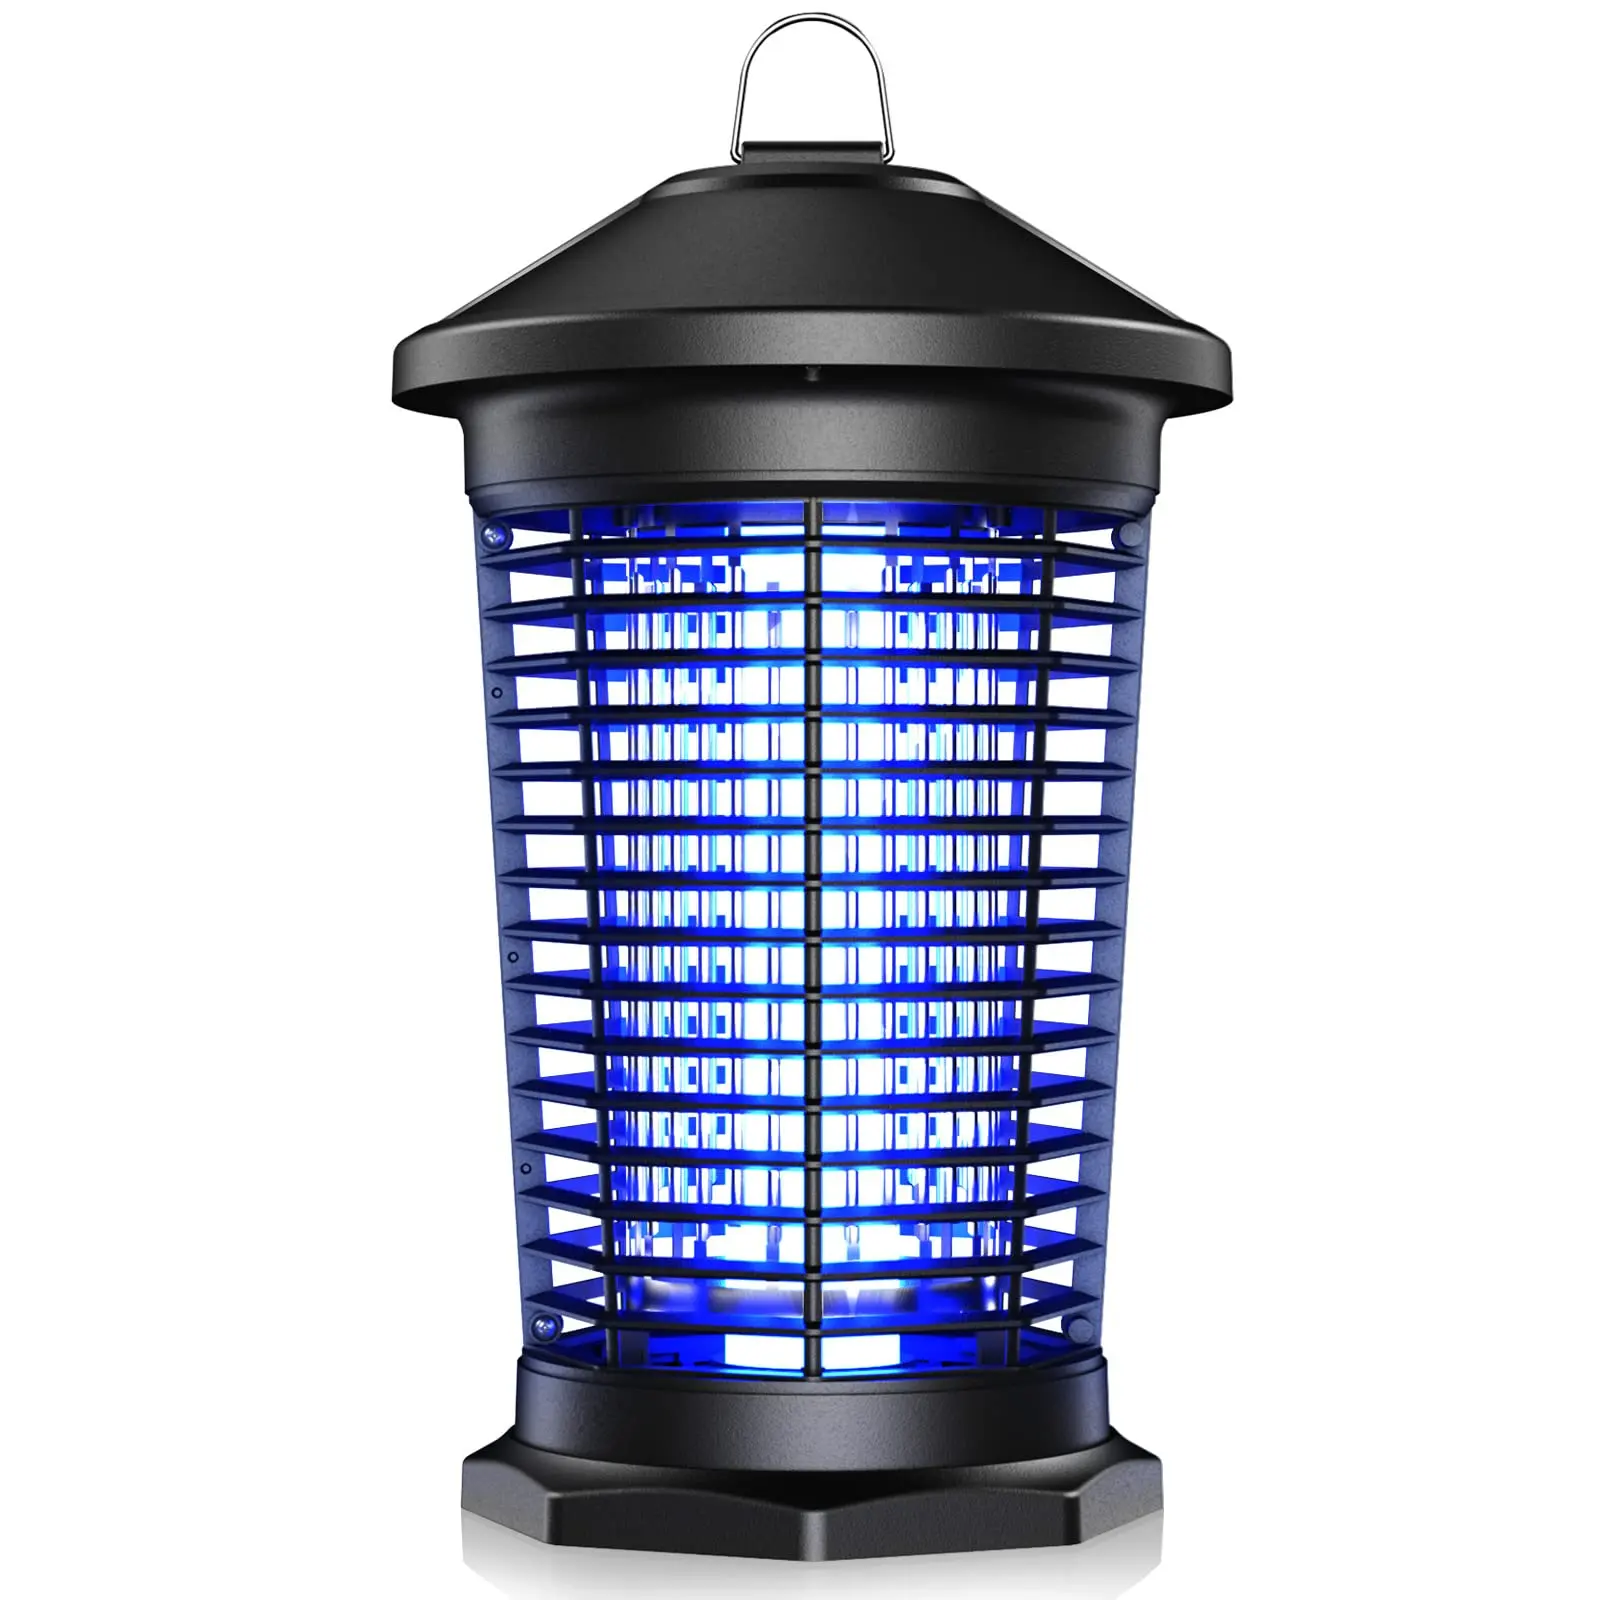 Portable Eletrical Bug Zapper Camping Lantern Outdoors 18 W 4000 V UVA Tube Mosquito Insect Killer Lamp